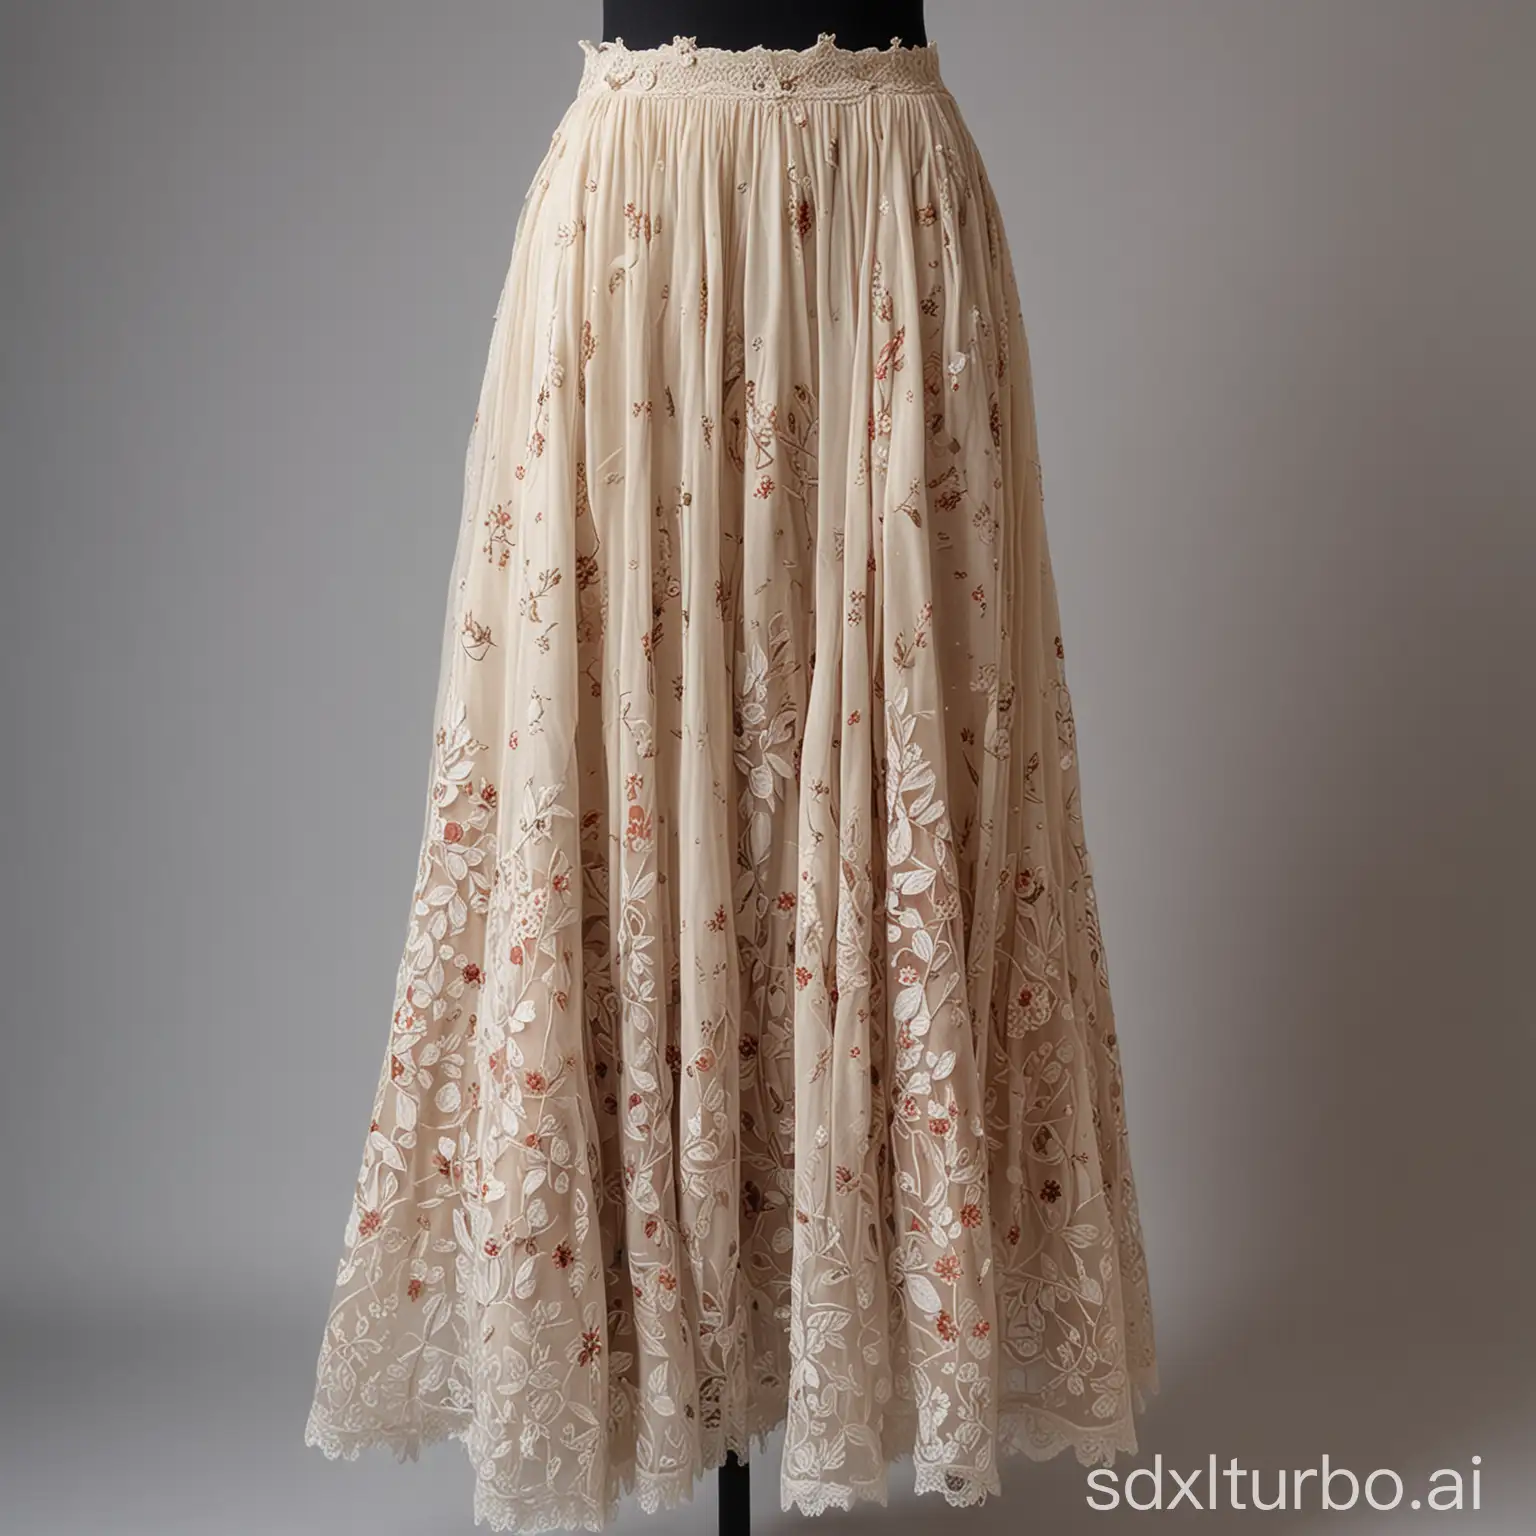 Elegant-Mannequin-Displaying-Flowing-Patterned-Skirt-with-Delicate-Lace-Embellishments